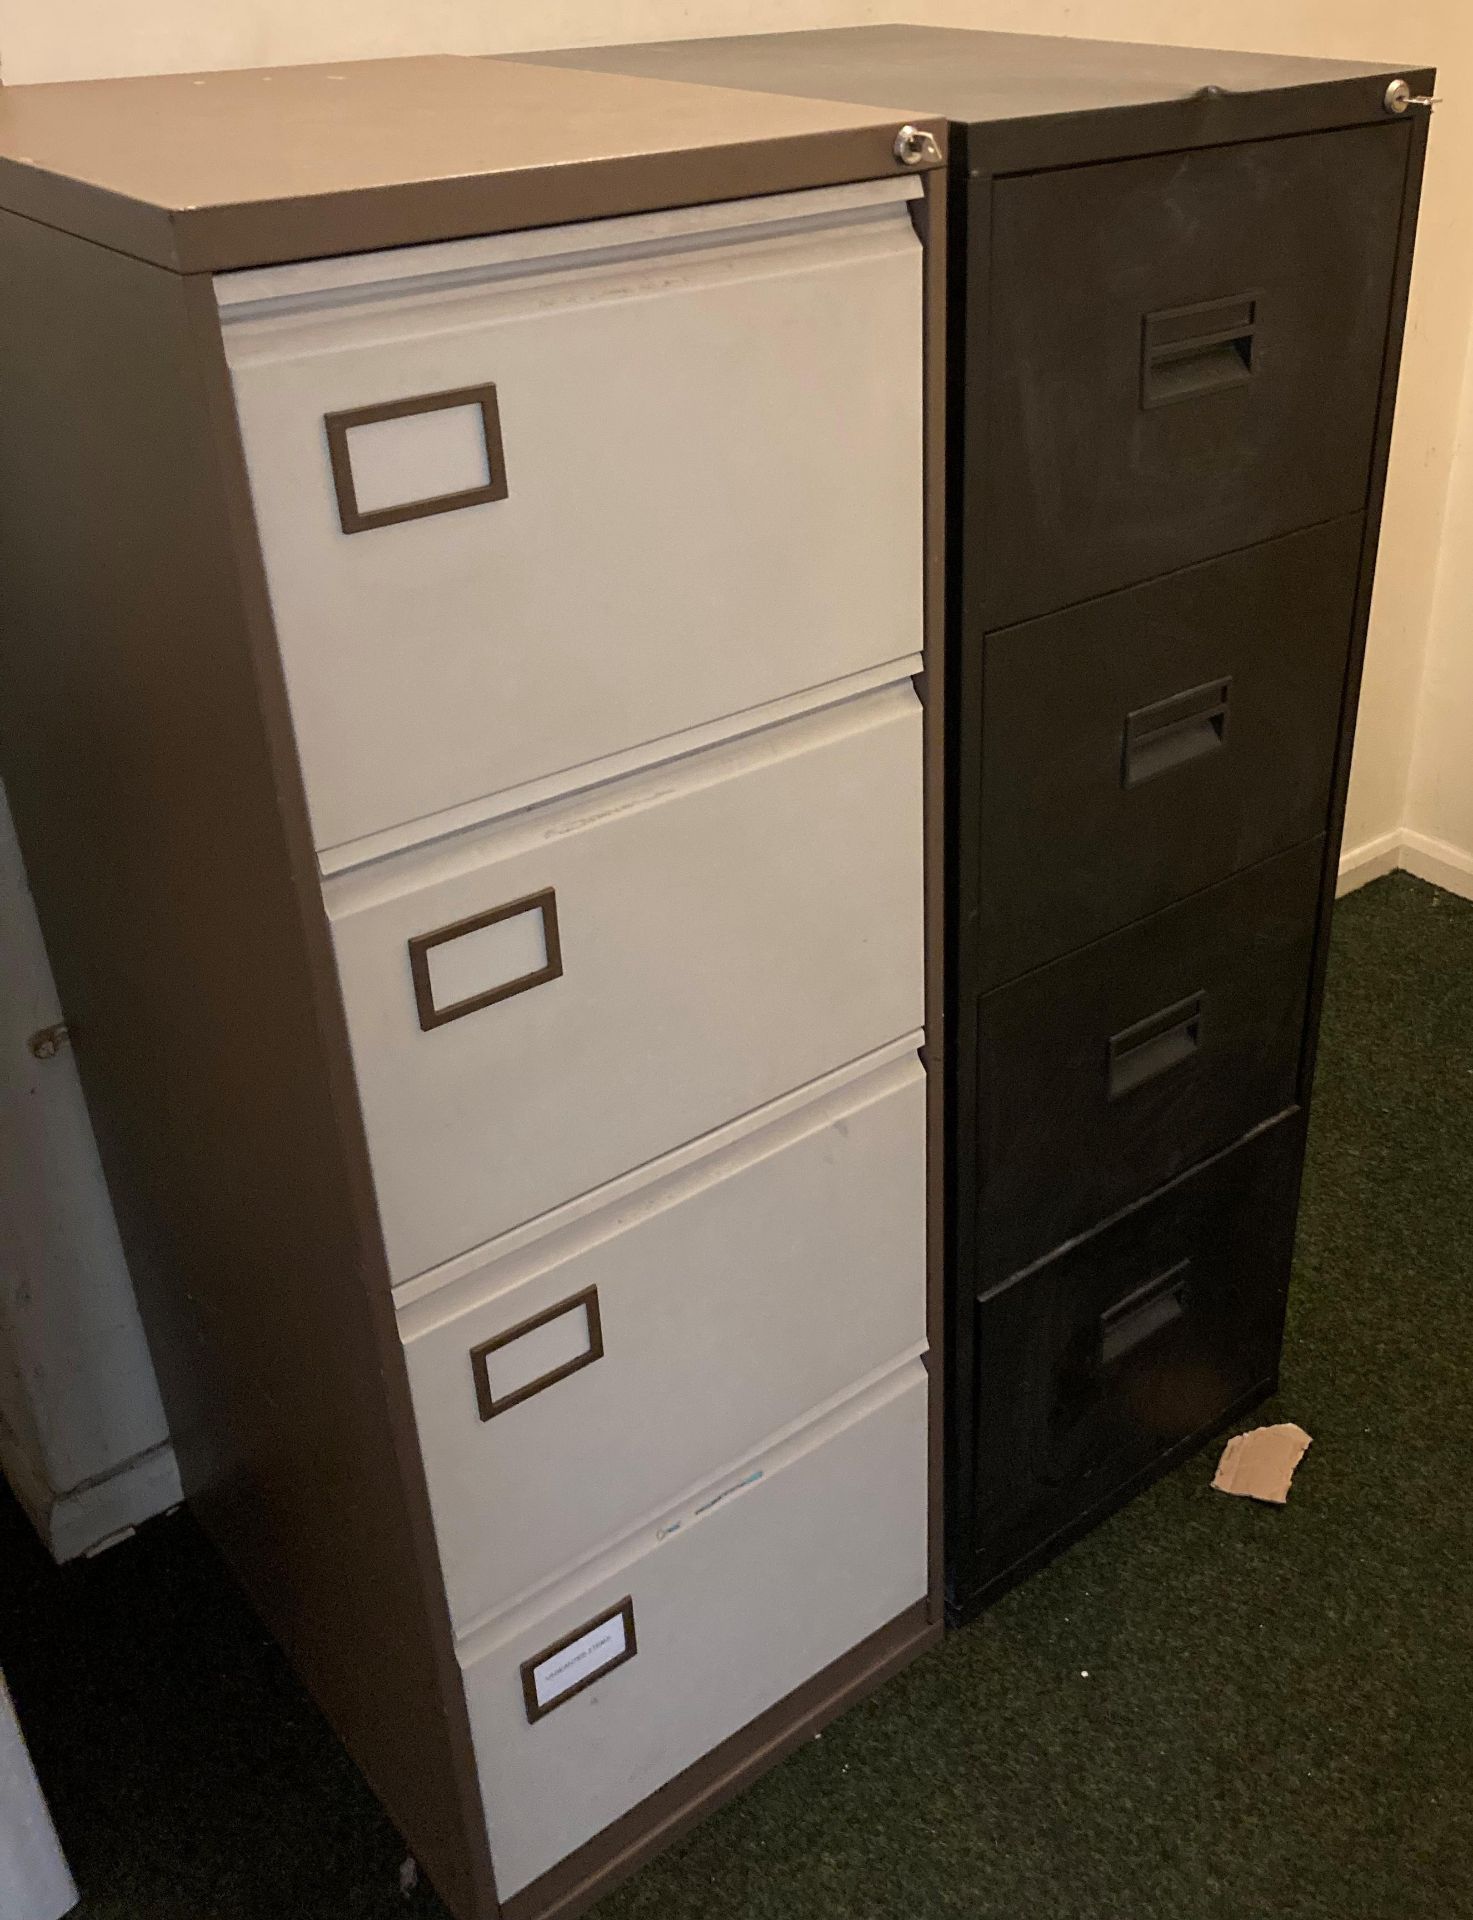 Contents to upstairs room - two metal four drawer filing cabinets, - Image 3 of 3